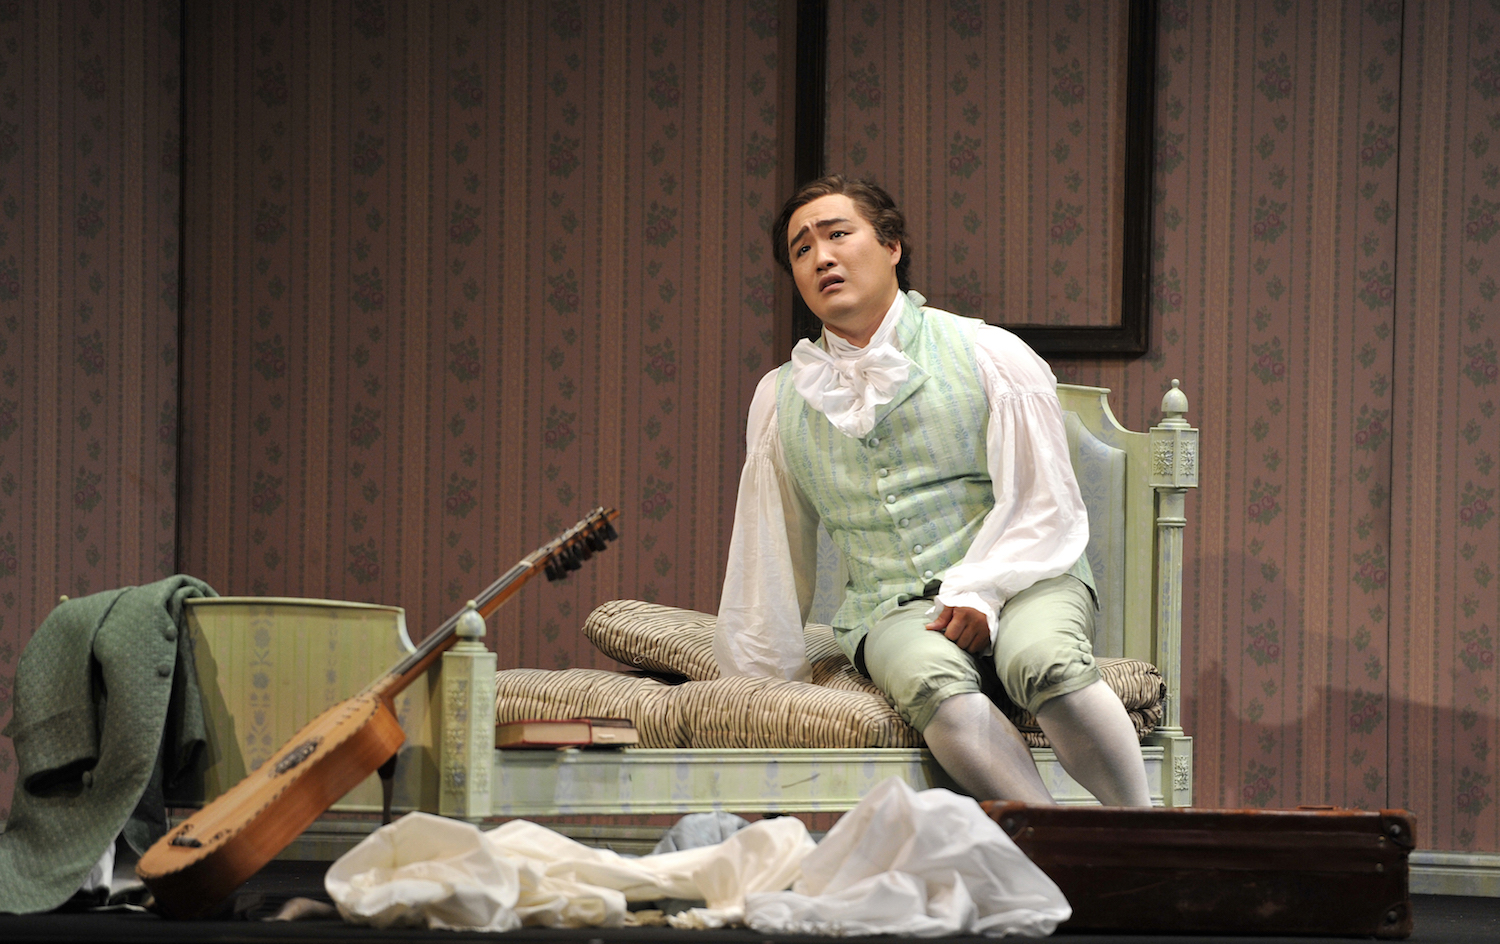 Don Pasquale, Glyndebourne Tour review 